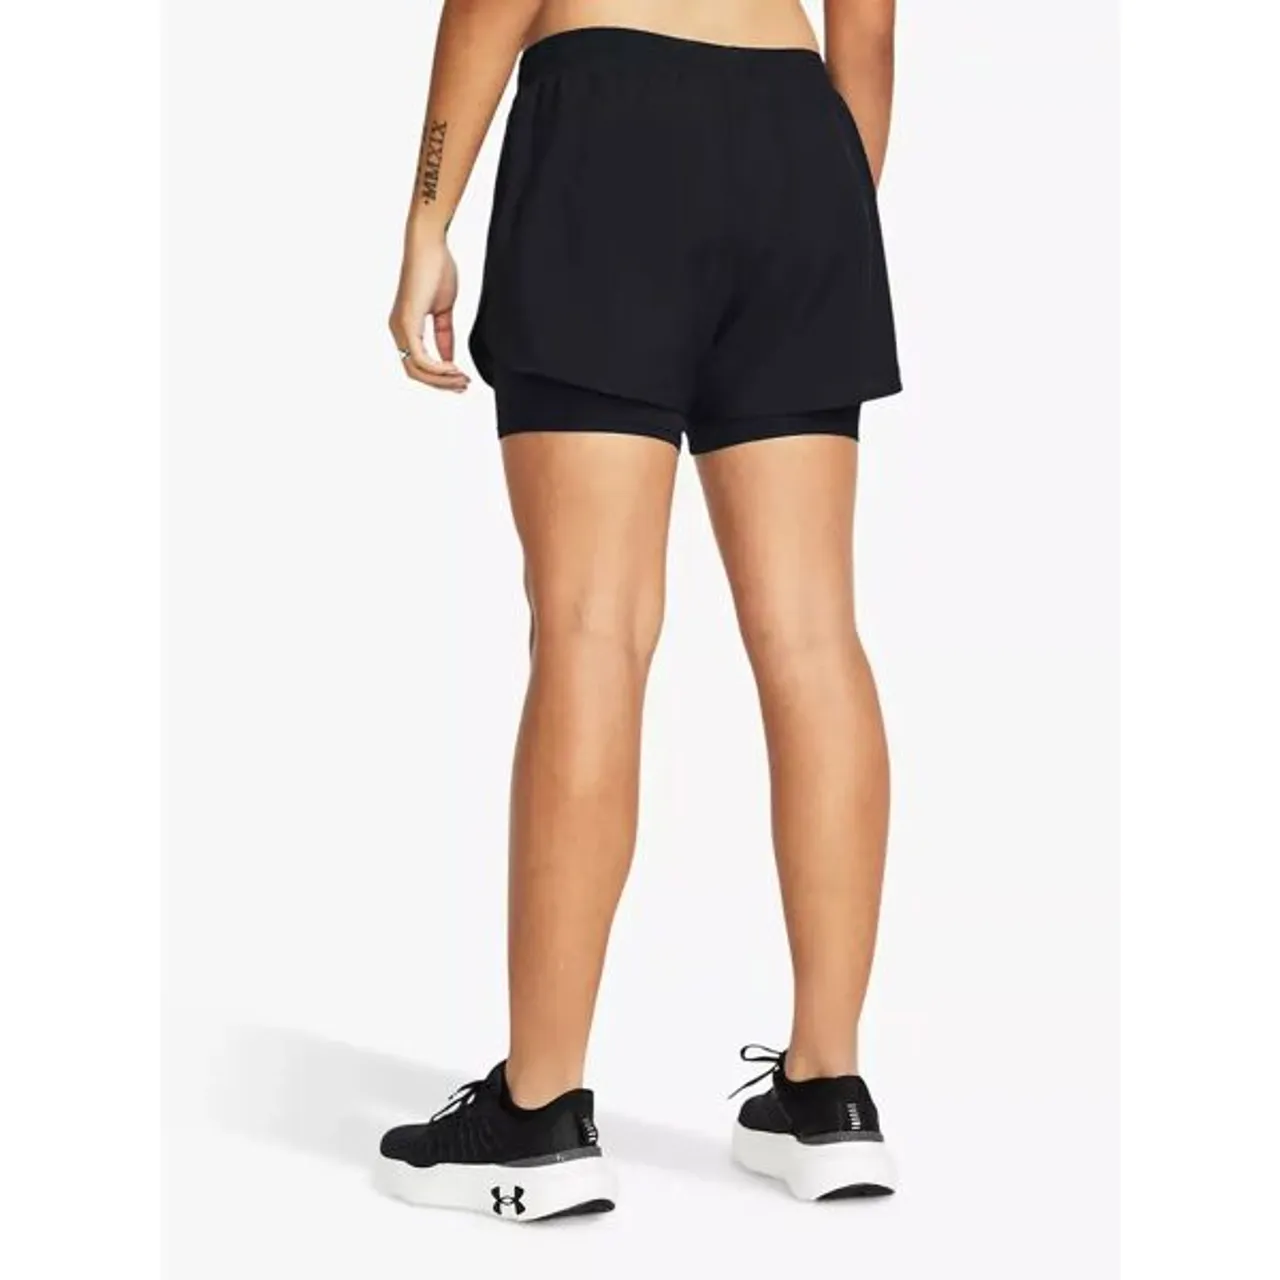 Under Armour Fly B 2 in 1 Shorts, Black/Reflective - Black/Reflective - Female